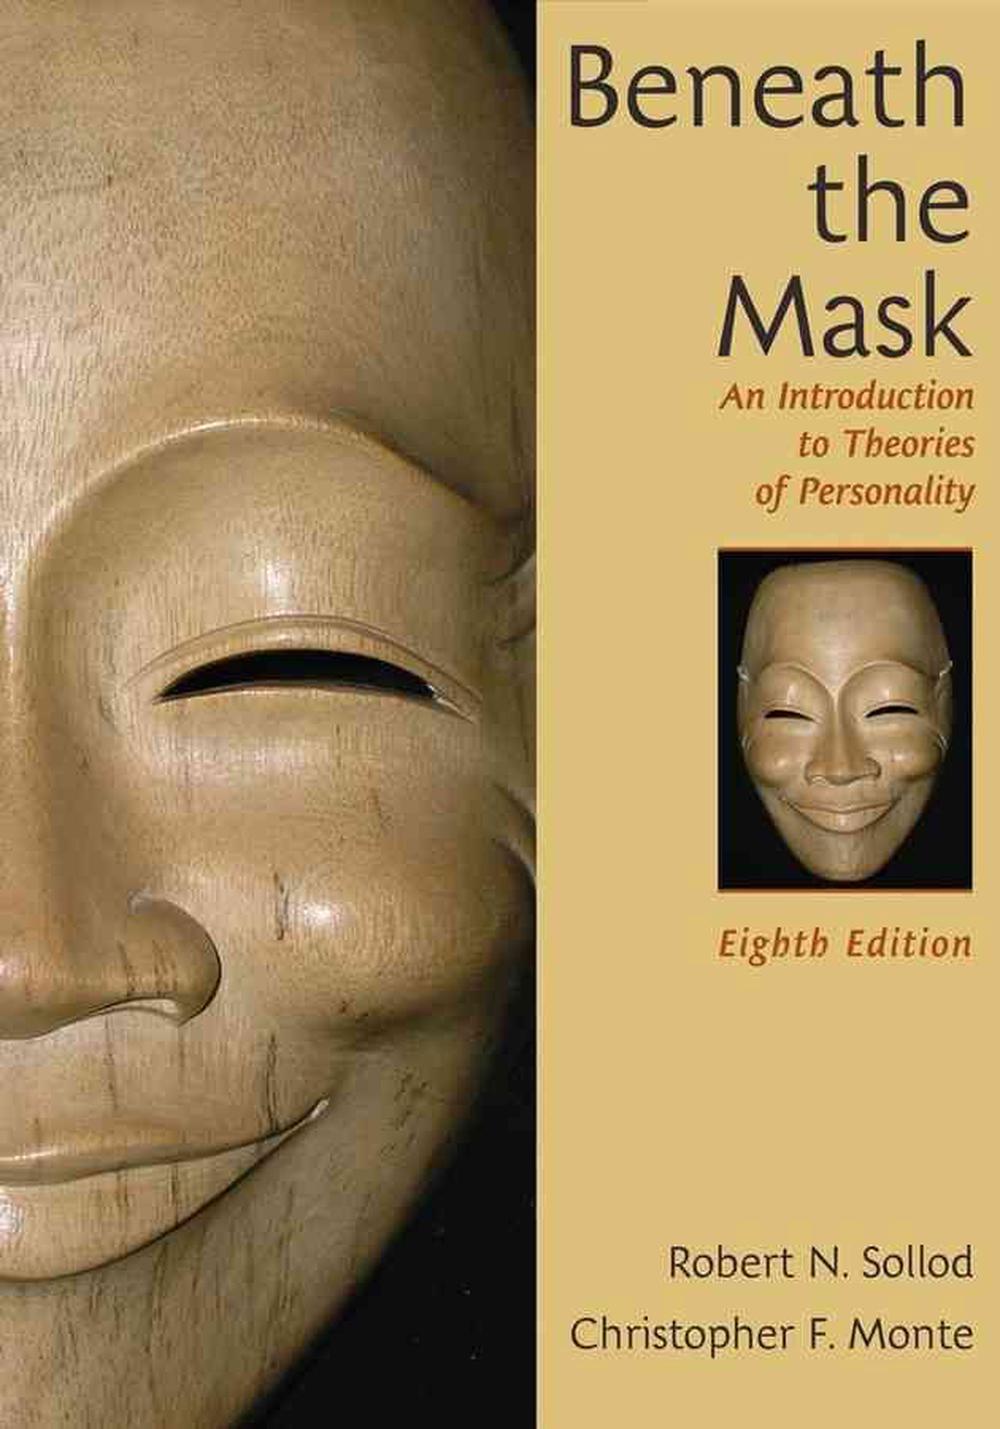 Beneath the Mask An Introduction to Theories of Personality by Robert